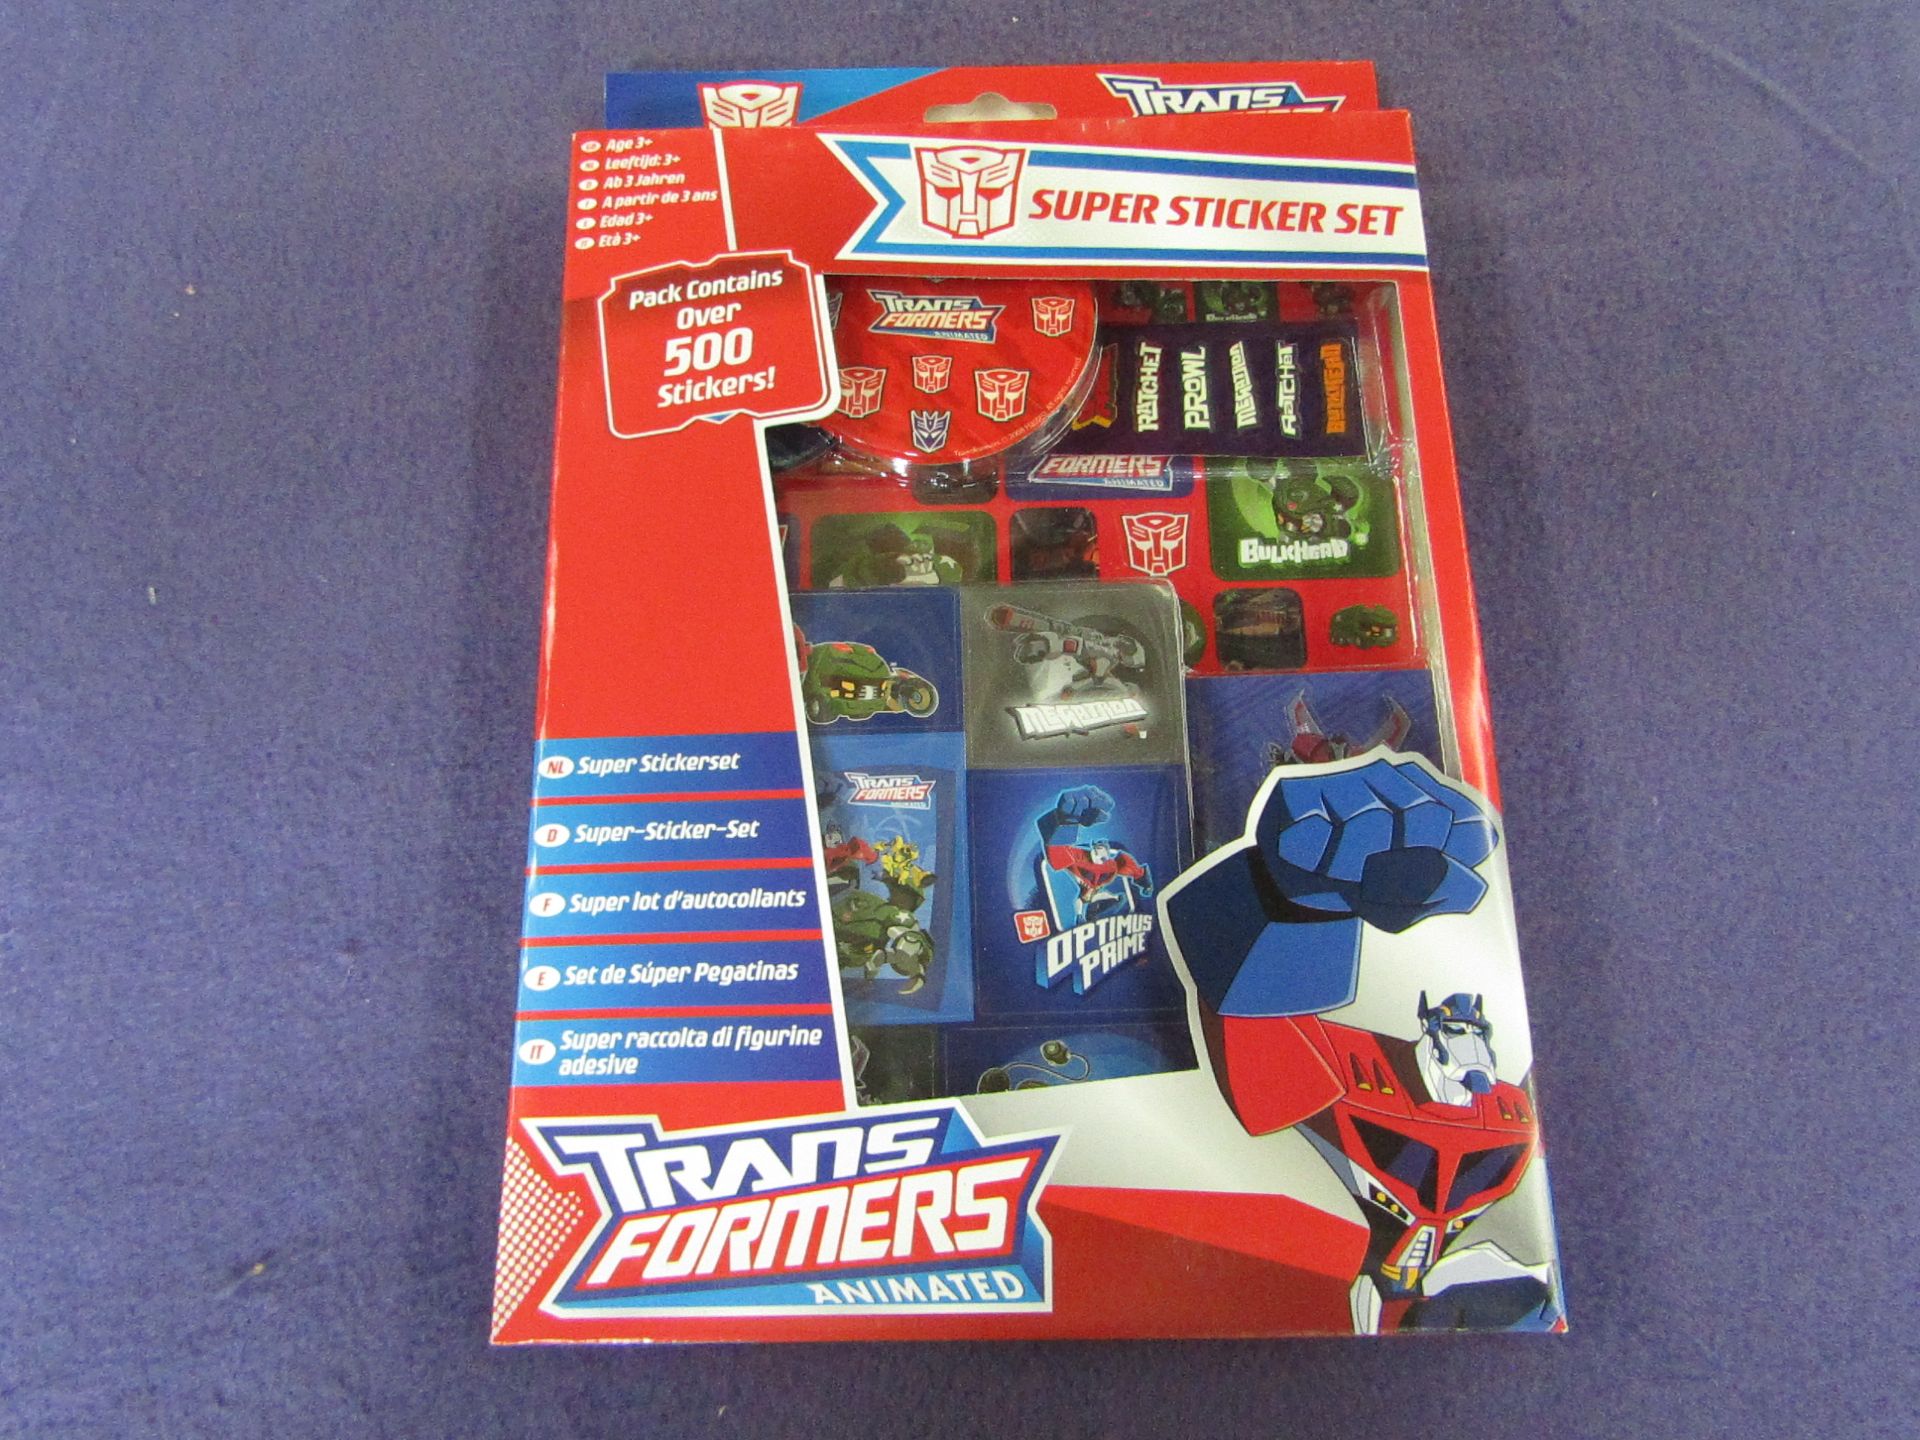 6x Transformers Animated - Super Sticker Set ( Contains Over 500 Stickers Per Box ) - New & Boxed.